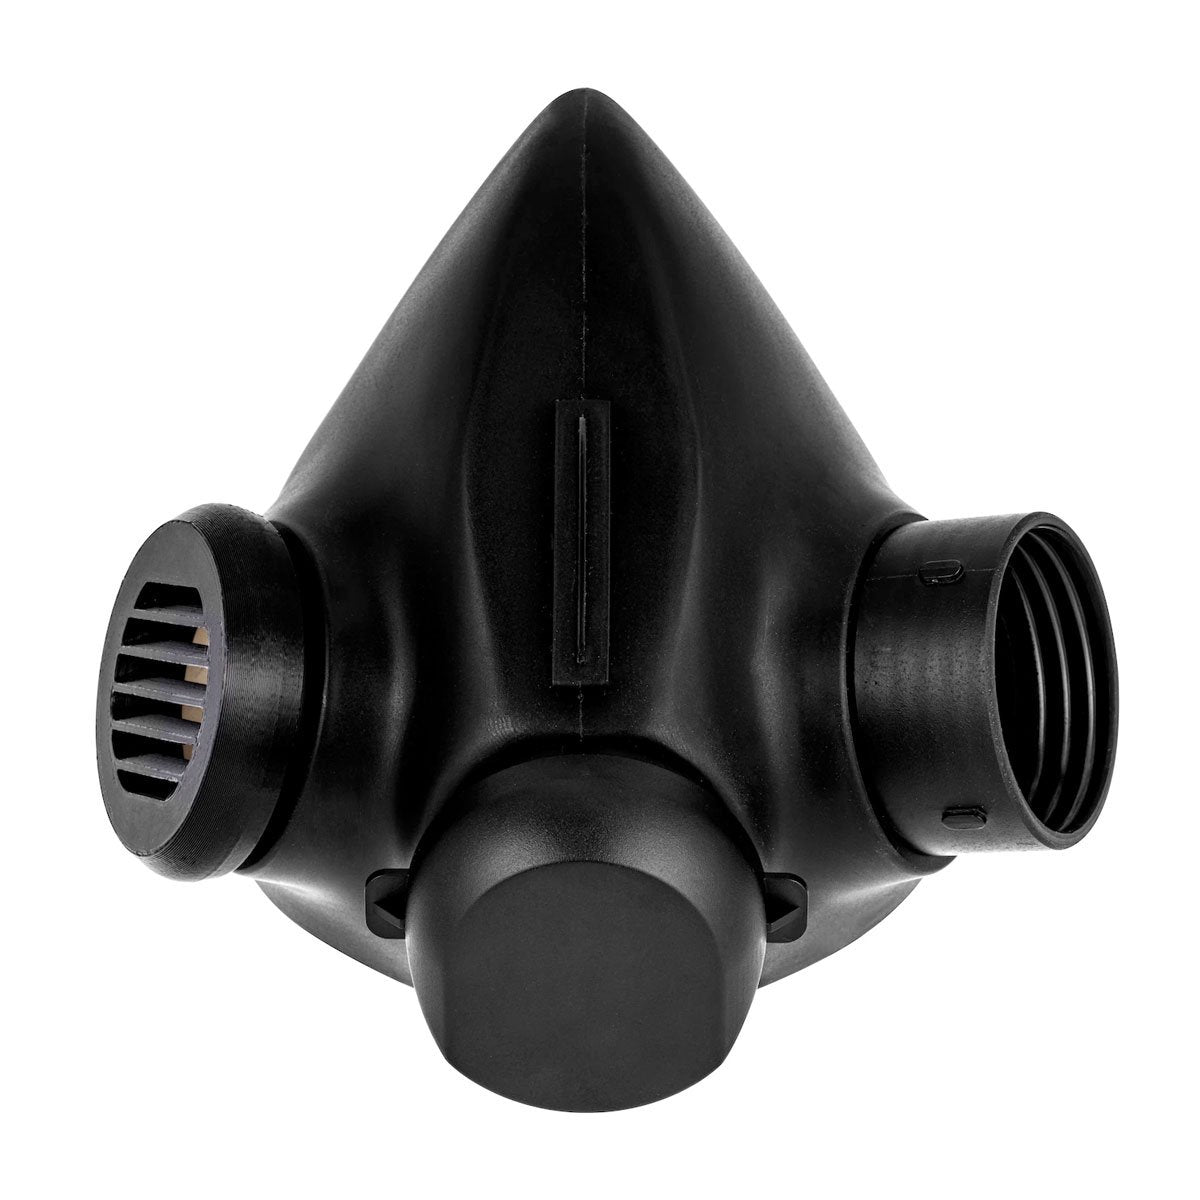 Mira Safety TAPR Tactical Air-Purifying Respirator Mask Universal Fit Protective Gear MIRA Safety Right-Handed TAPR Body Tactical Gear Supplier Tactical Distributors Australia